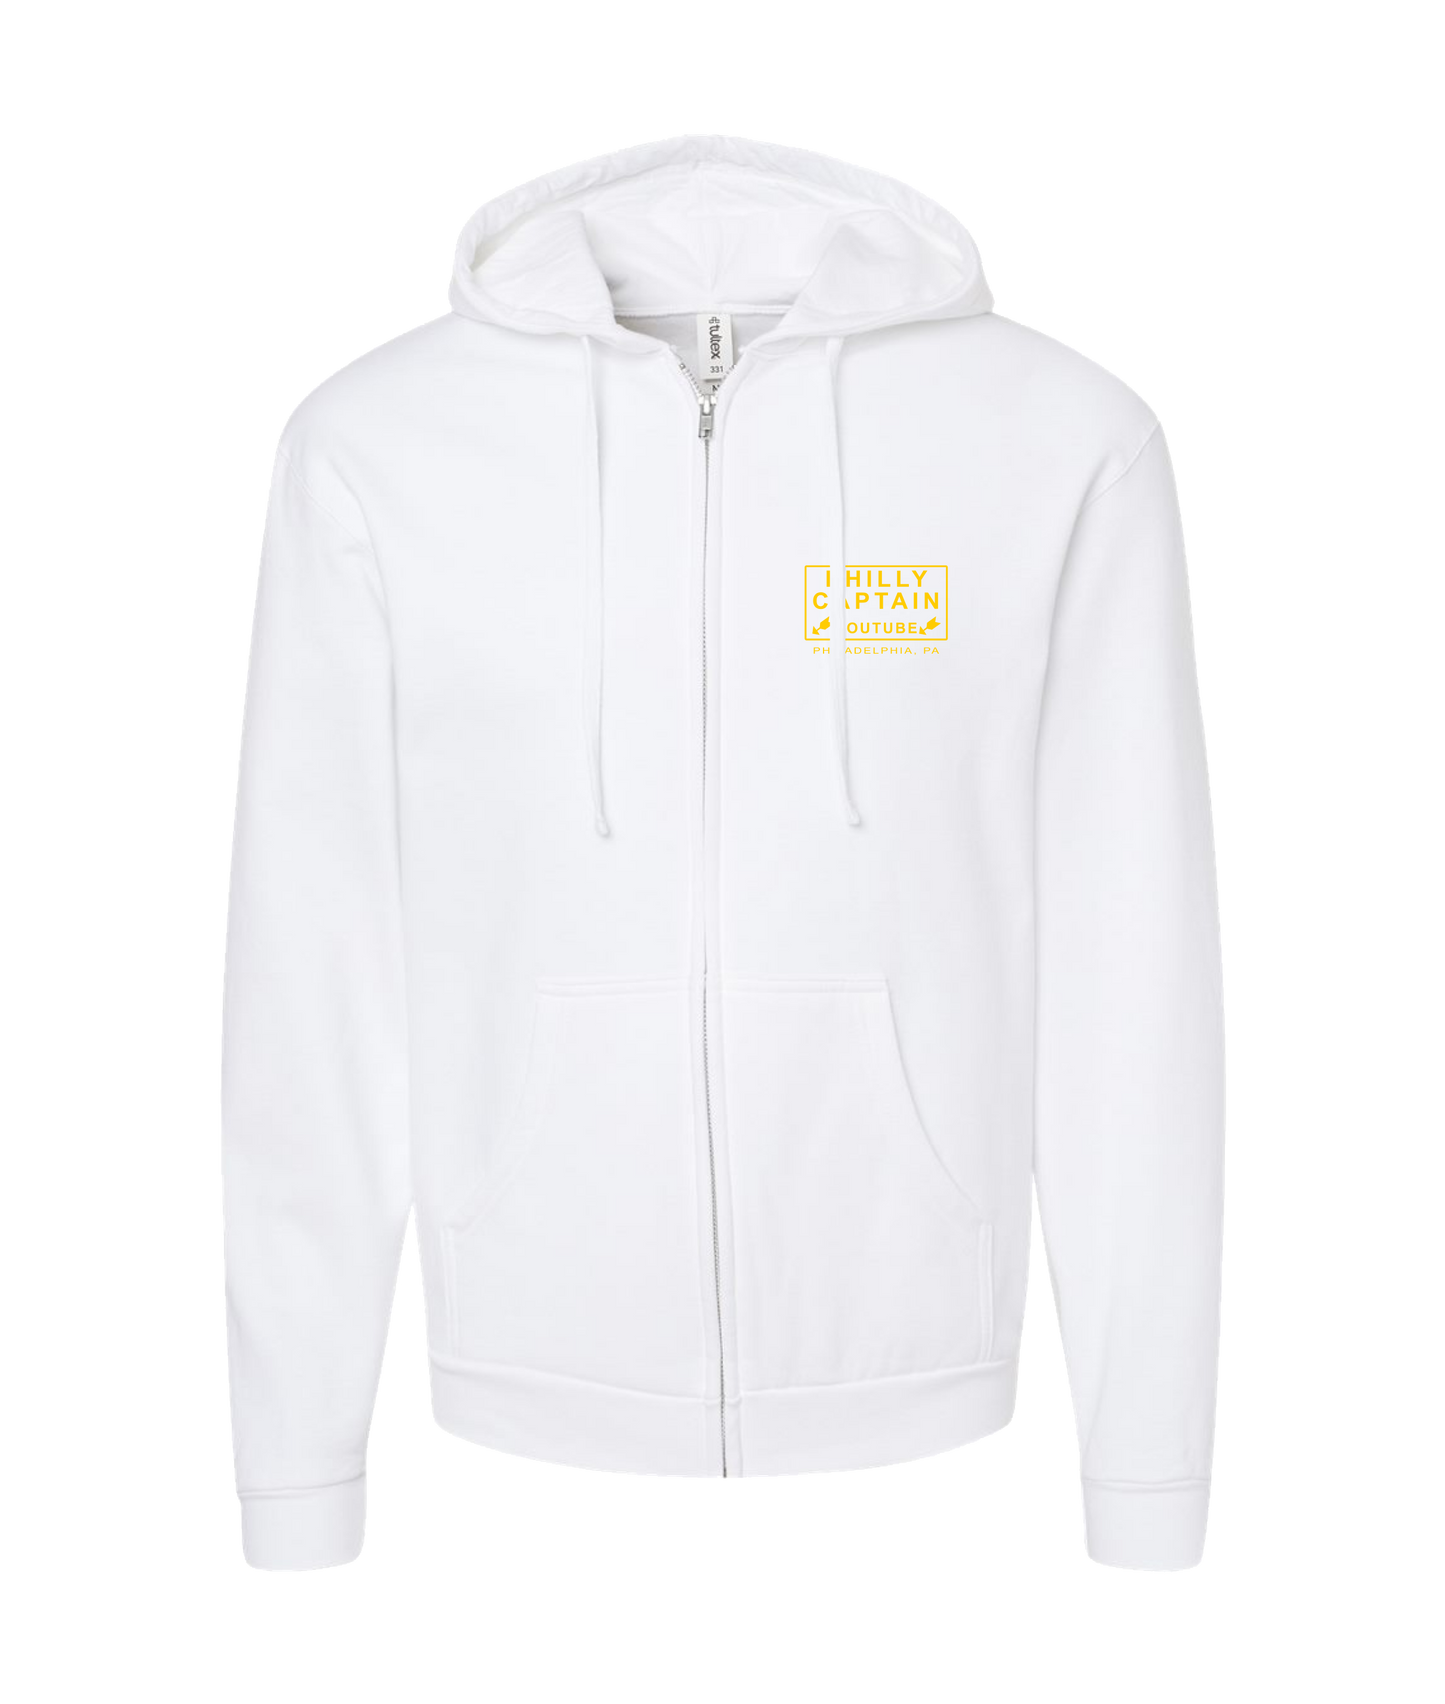 The Philly Captain's Merch is Fire - YouTube - White Zip Up Hoodie